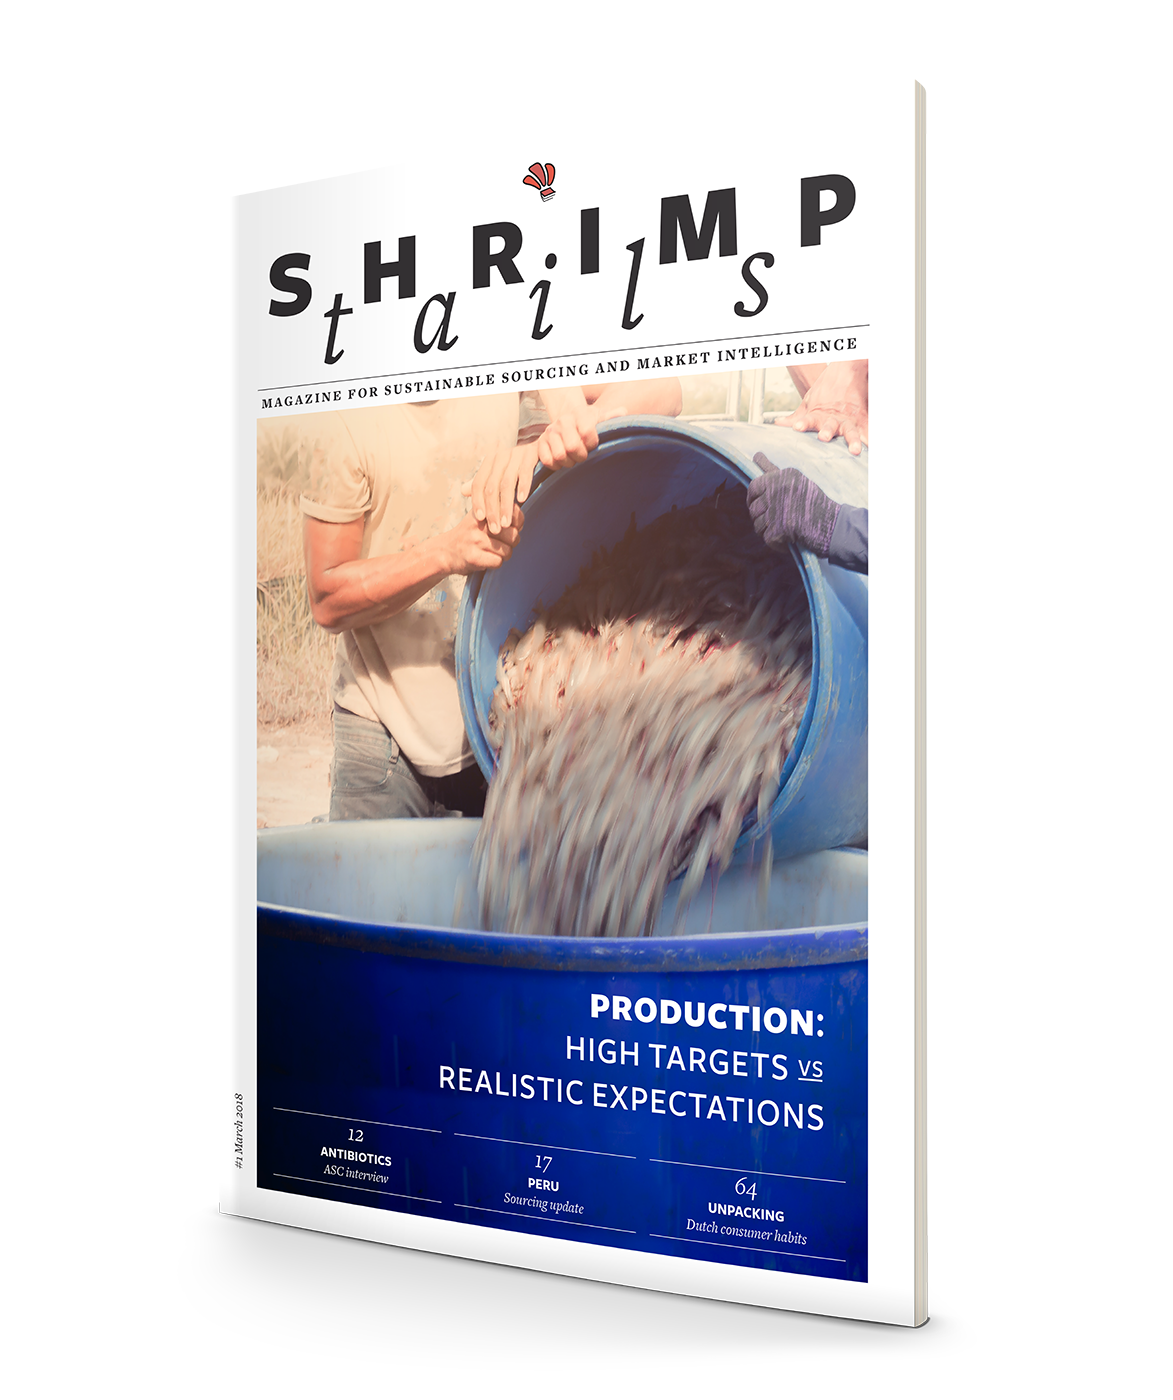 Shrimp Tails, the first and only shrimp industry magazine